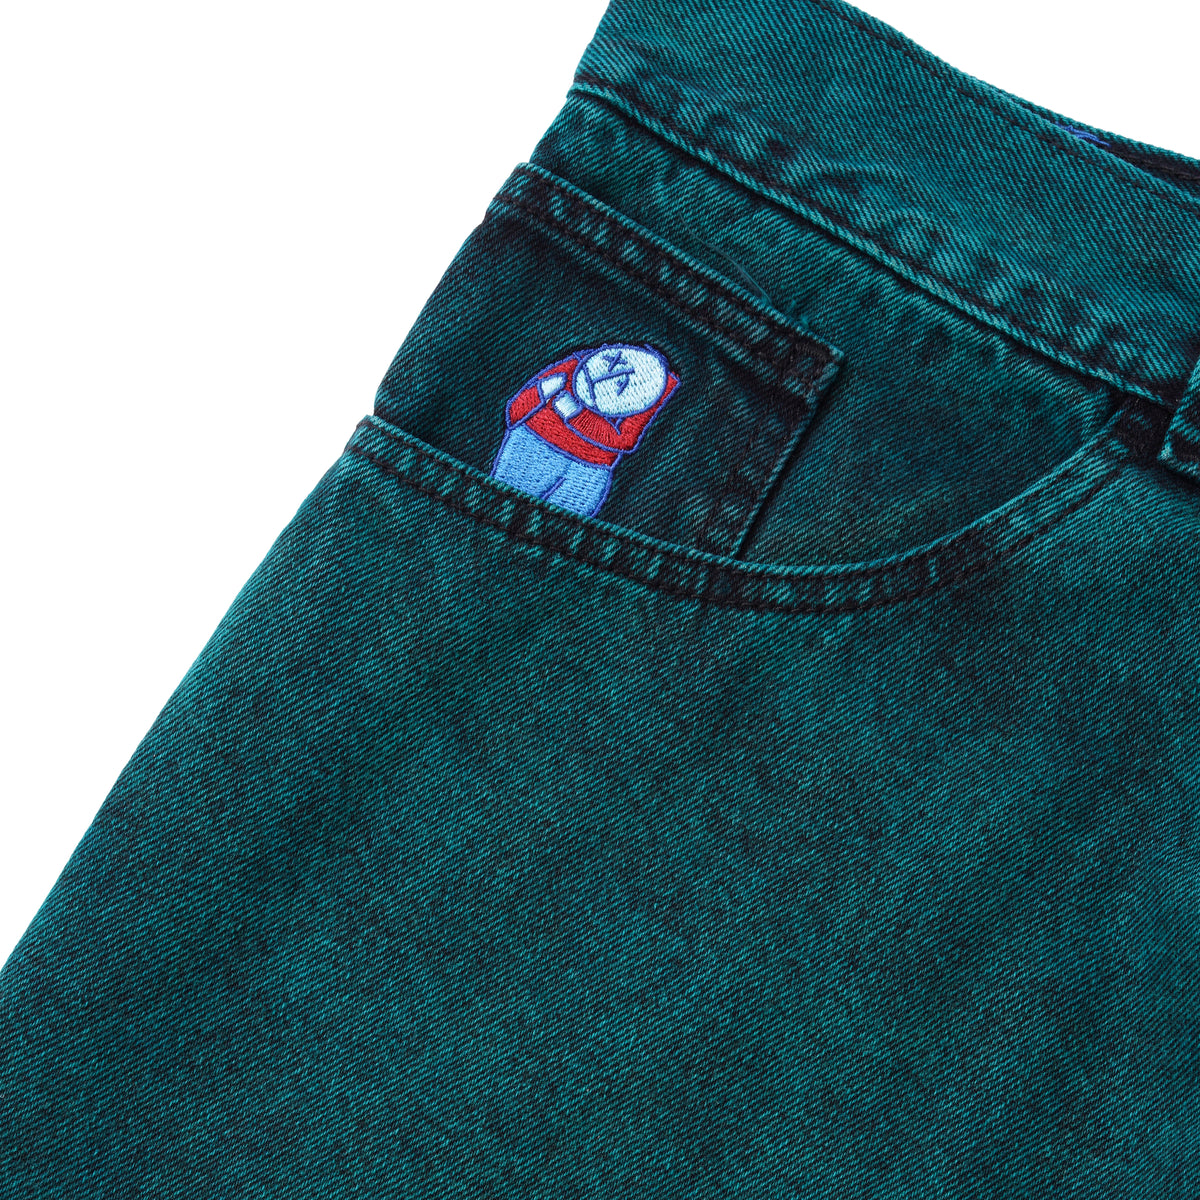 Find the latest products and Offers at Our Big Boy Jeans, Teal